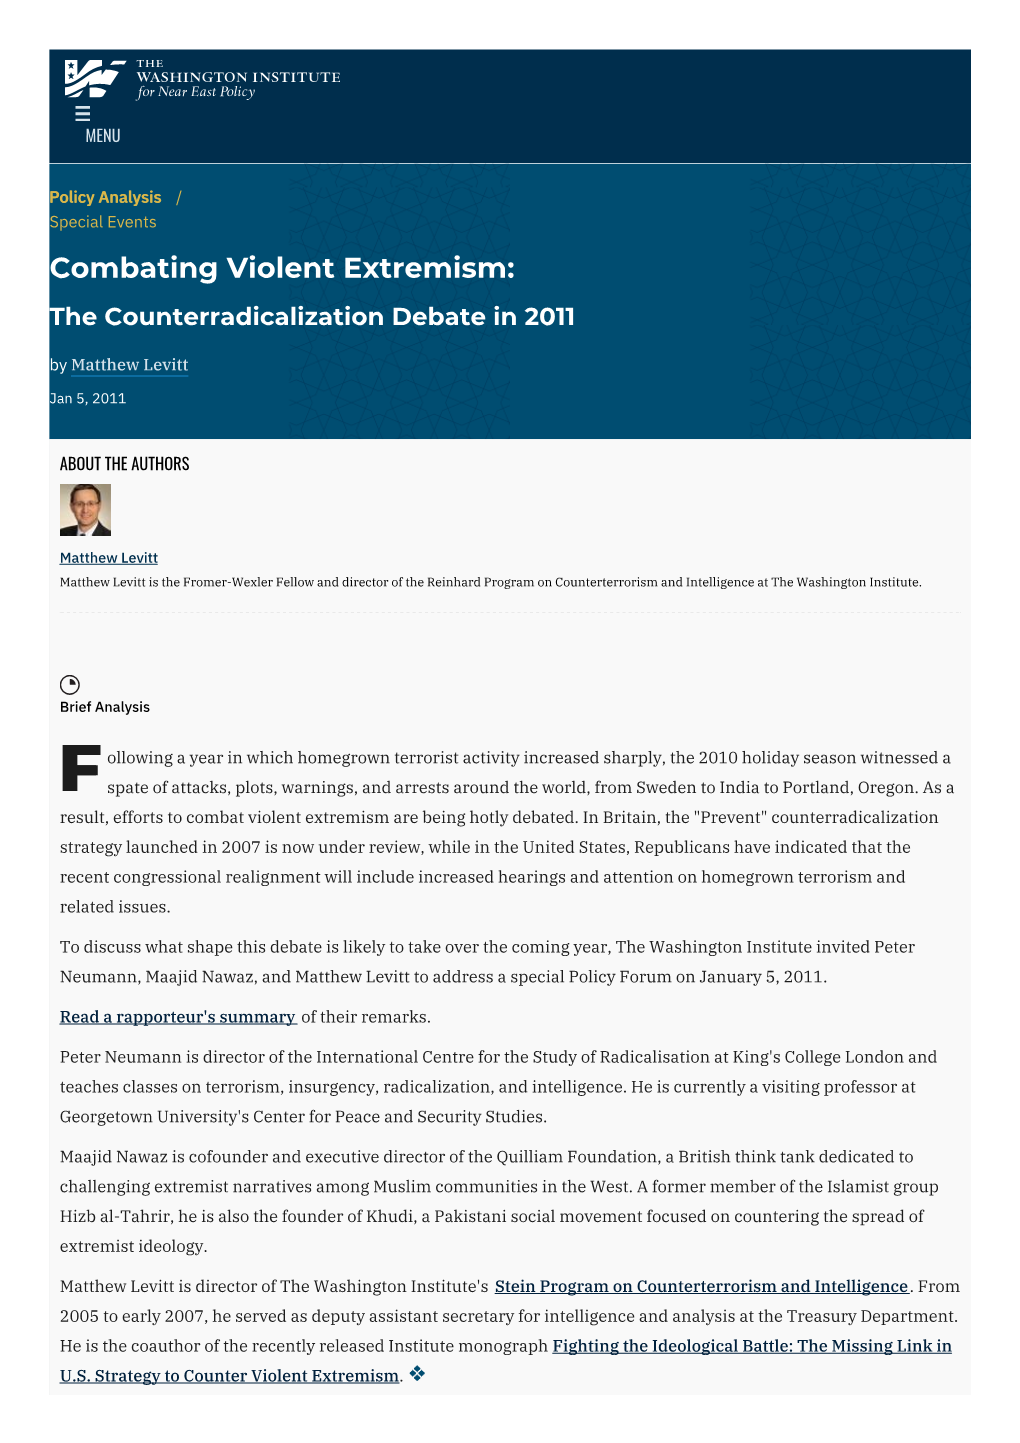 Combating Violent Extremism: the Counterradicalization Debate in 2011 by Matthew Levitt